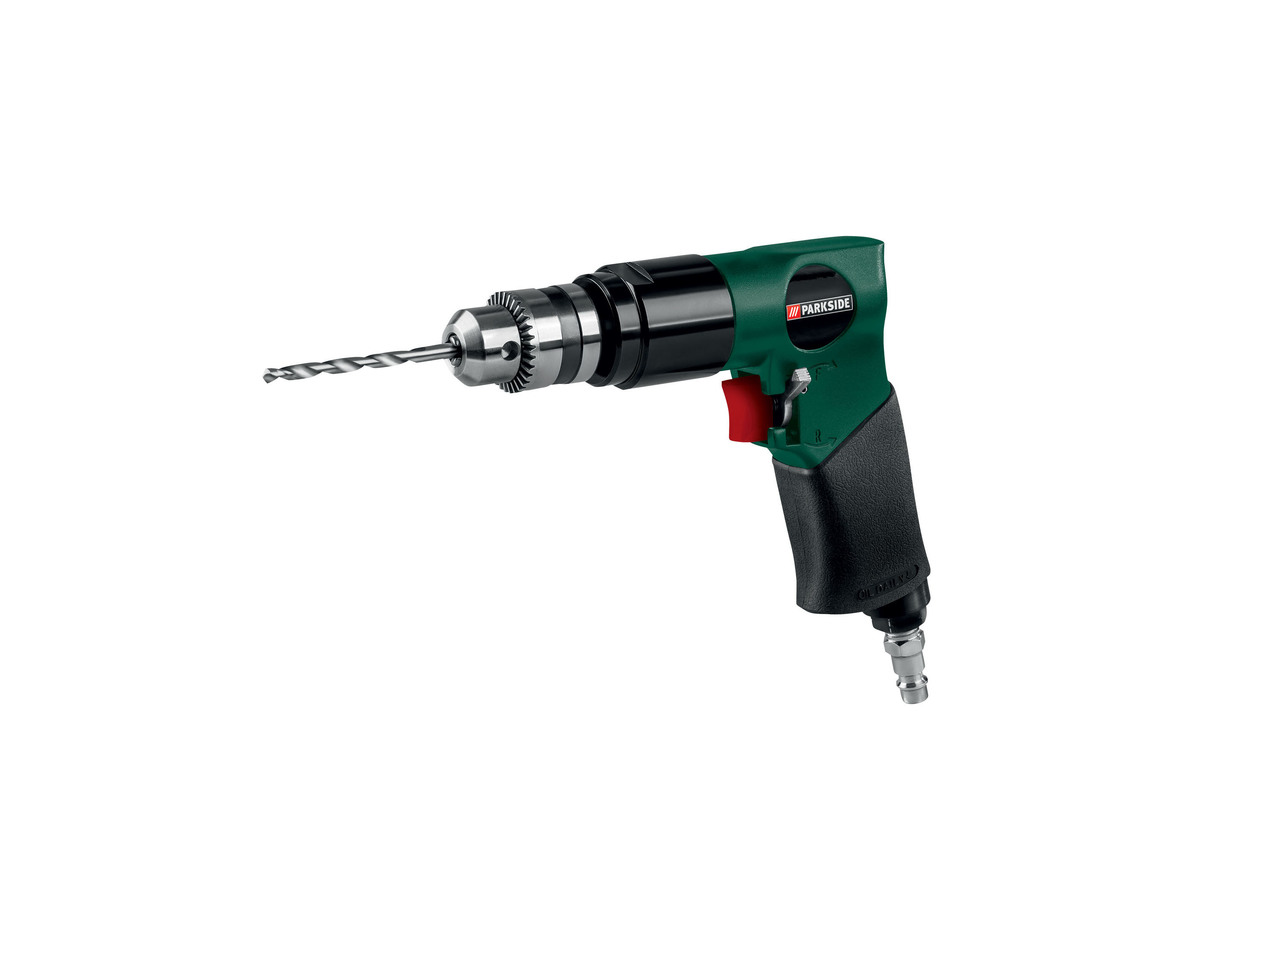 Pneumatic Saw, Drill or Hammer Drill